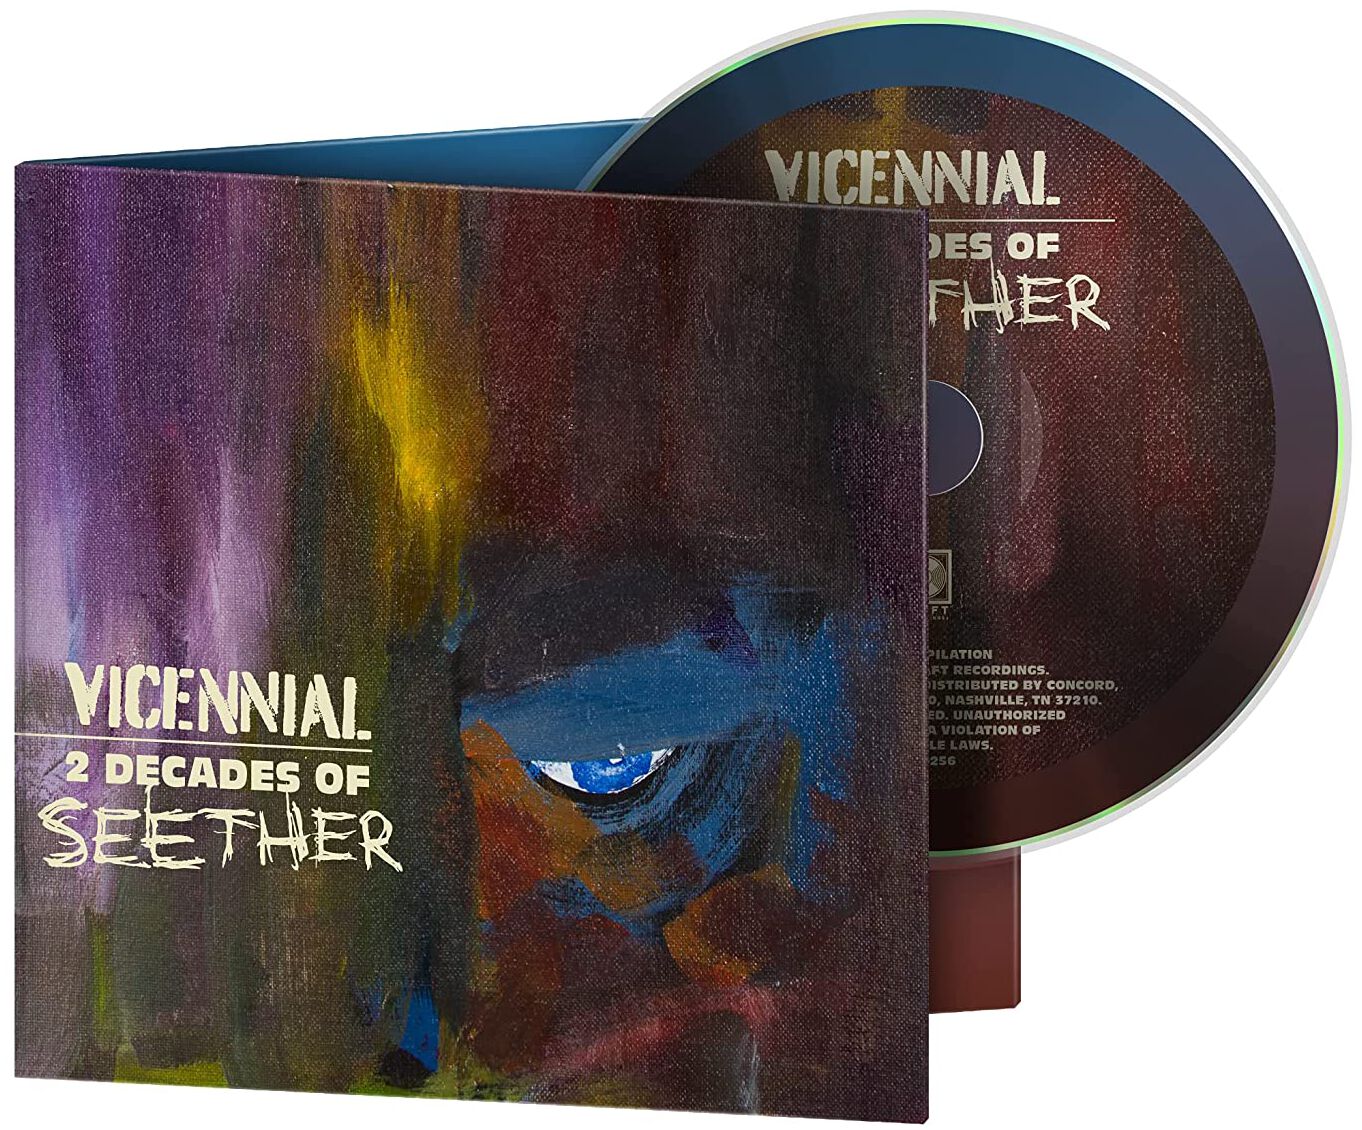 Image of Seether Vicennial 2 decades of Seether CD Standard